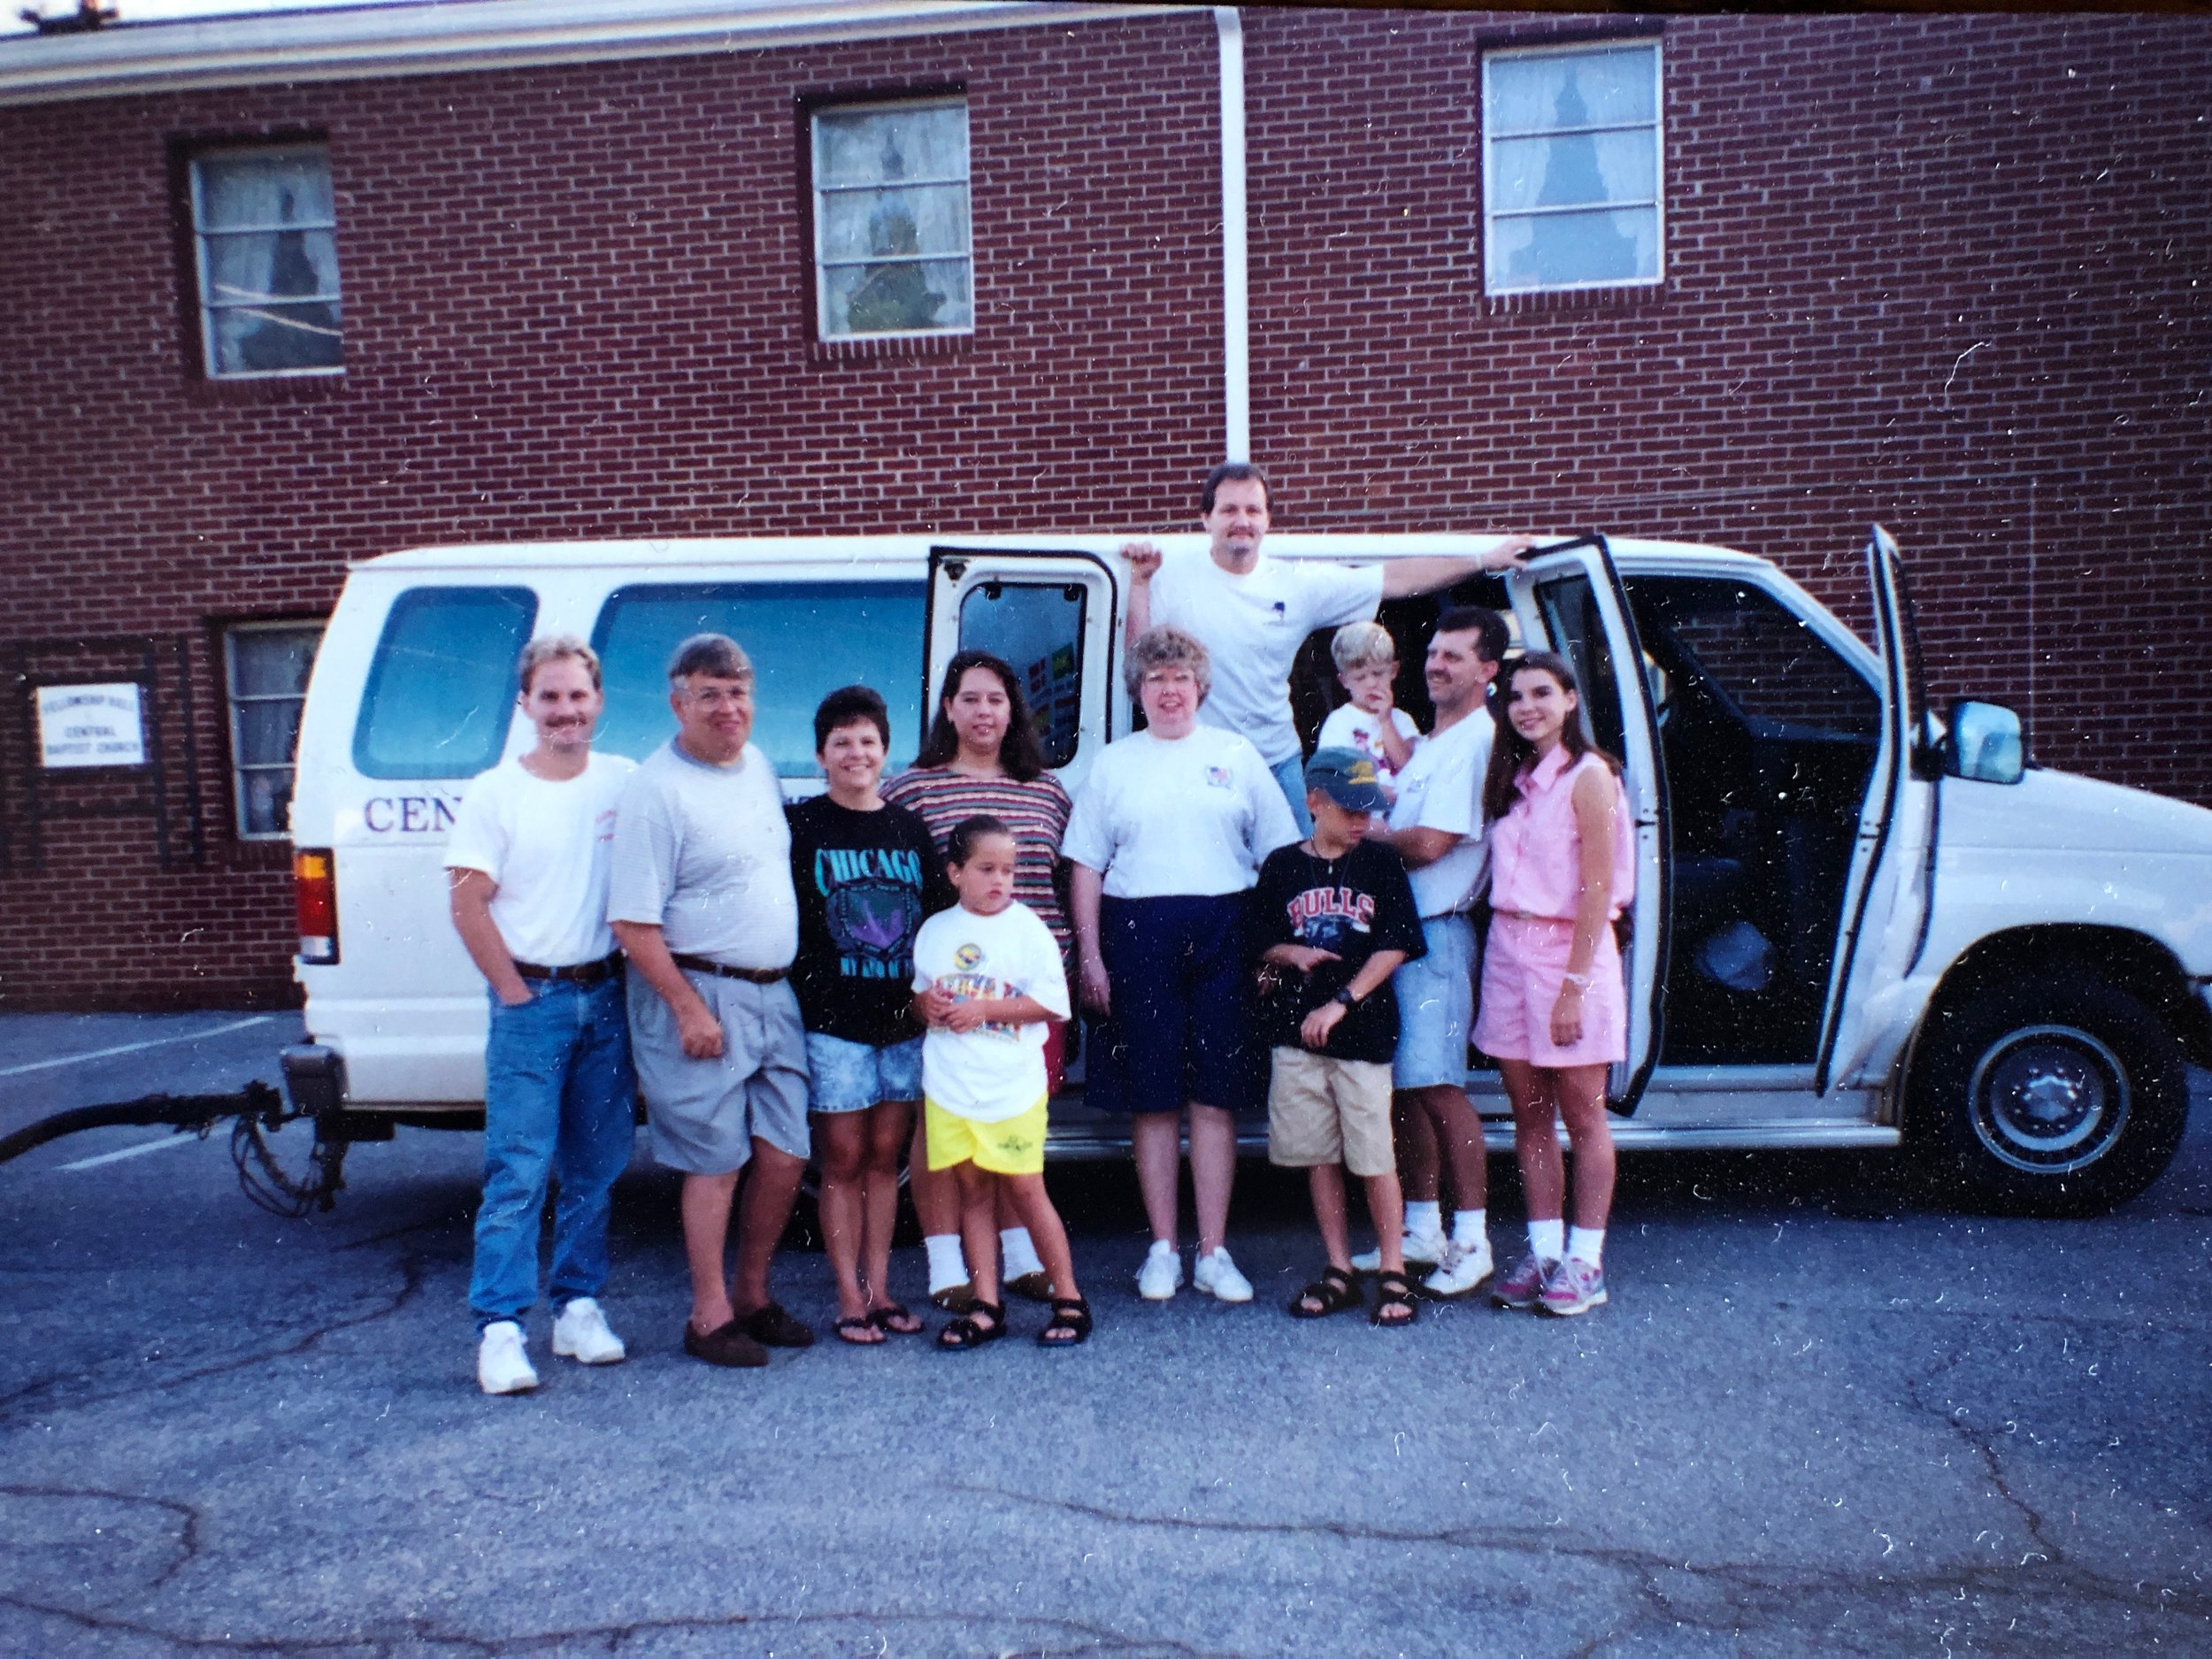 Mary Splawn far right, Dot Stephens center white t-shirt and others going on mission trip to Kenvir KY.jpg